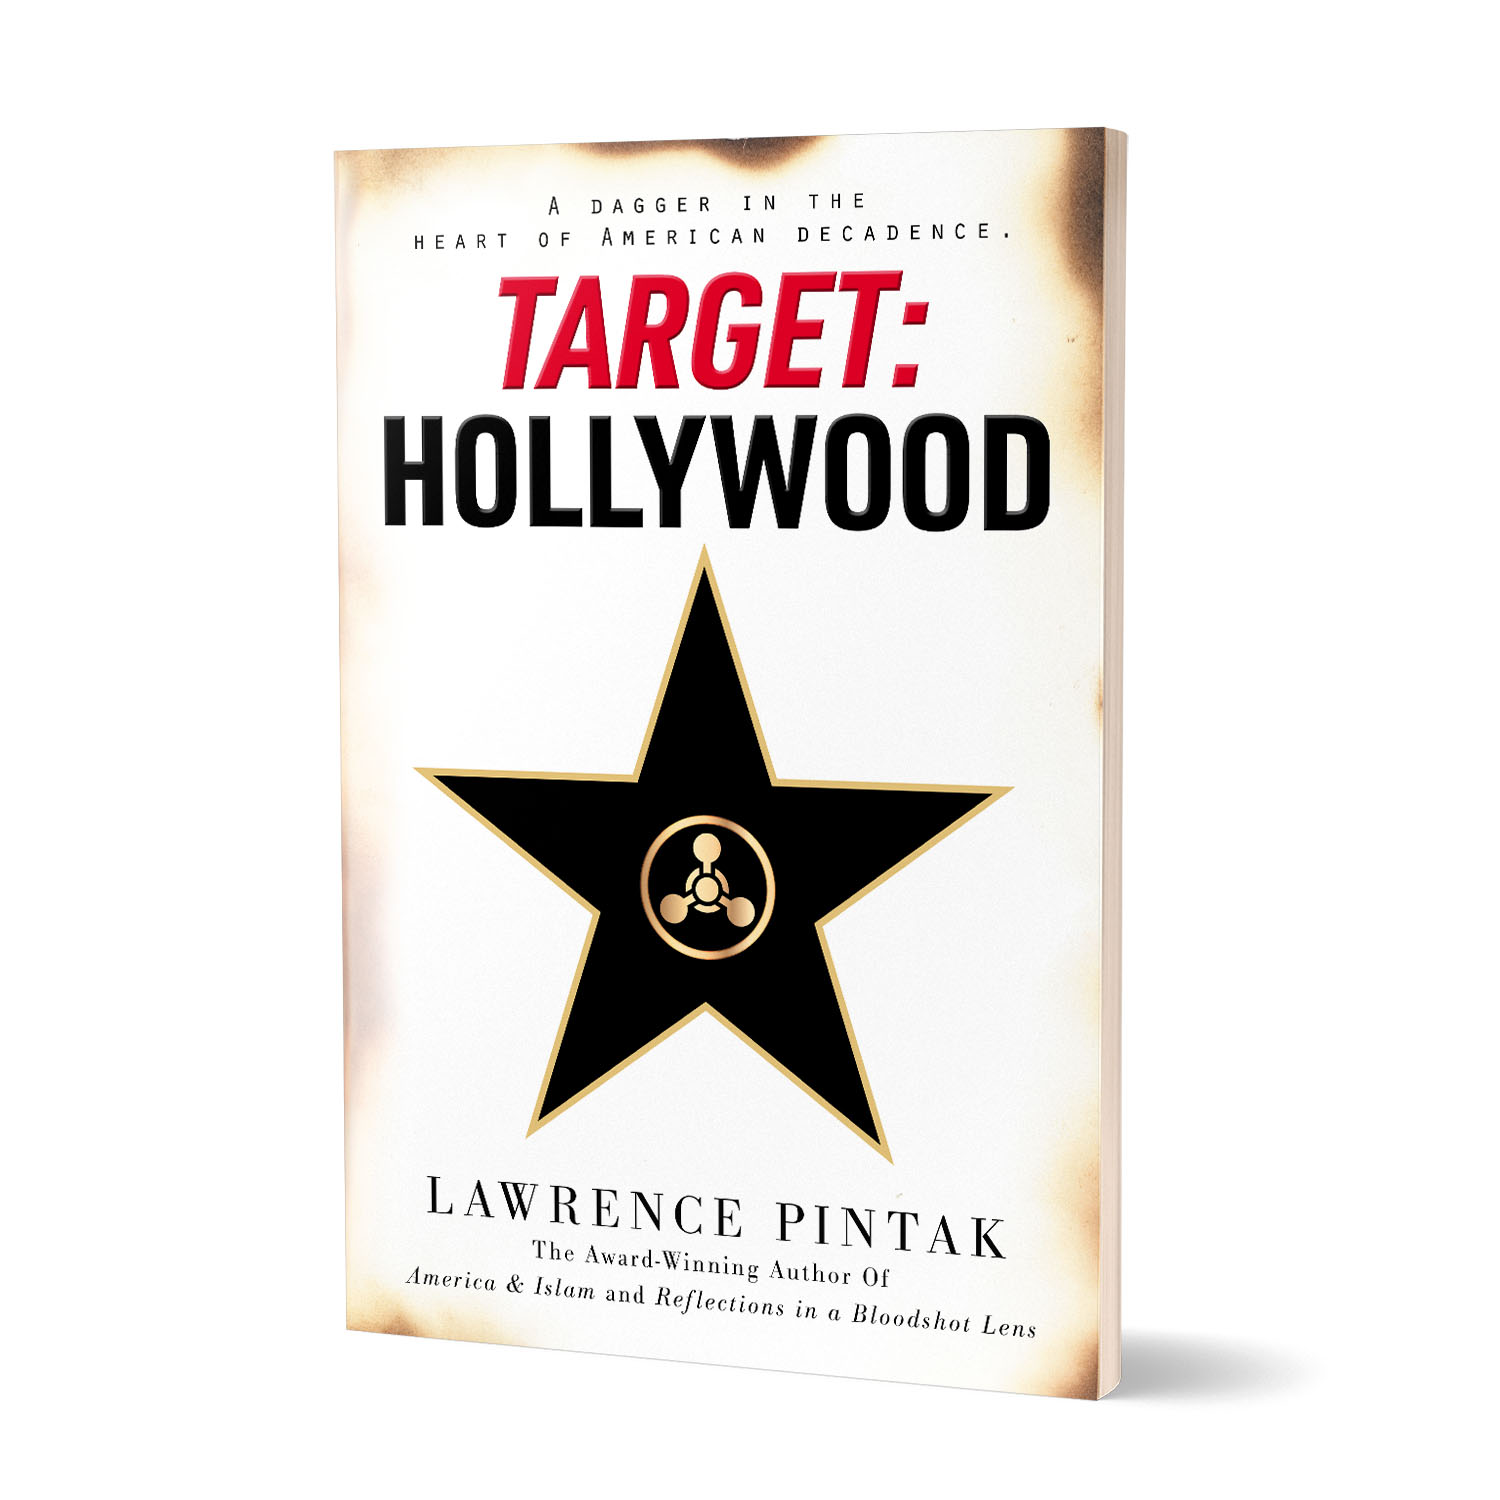 'Target: Hollywood' is an excellent retro terrorism thriller. The author is Lawrence Pintak. The book cover and interior were designed by Mark Thomas of coverness.com. To find out more about my book design services, please visit www.coverness.com